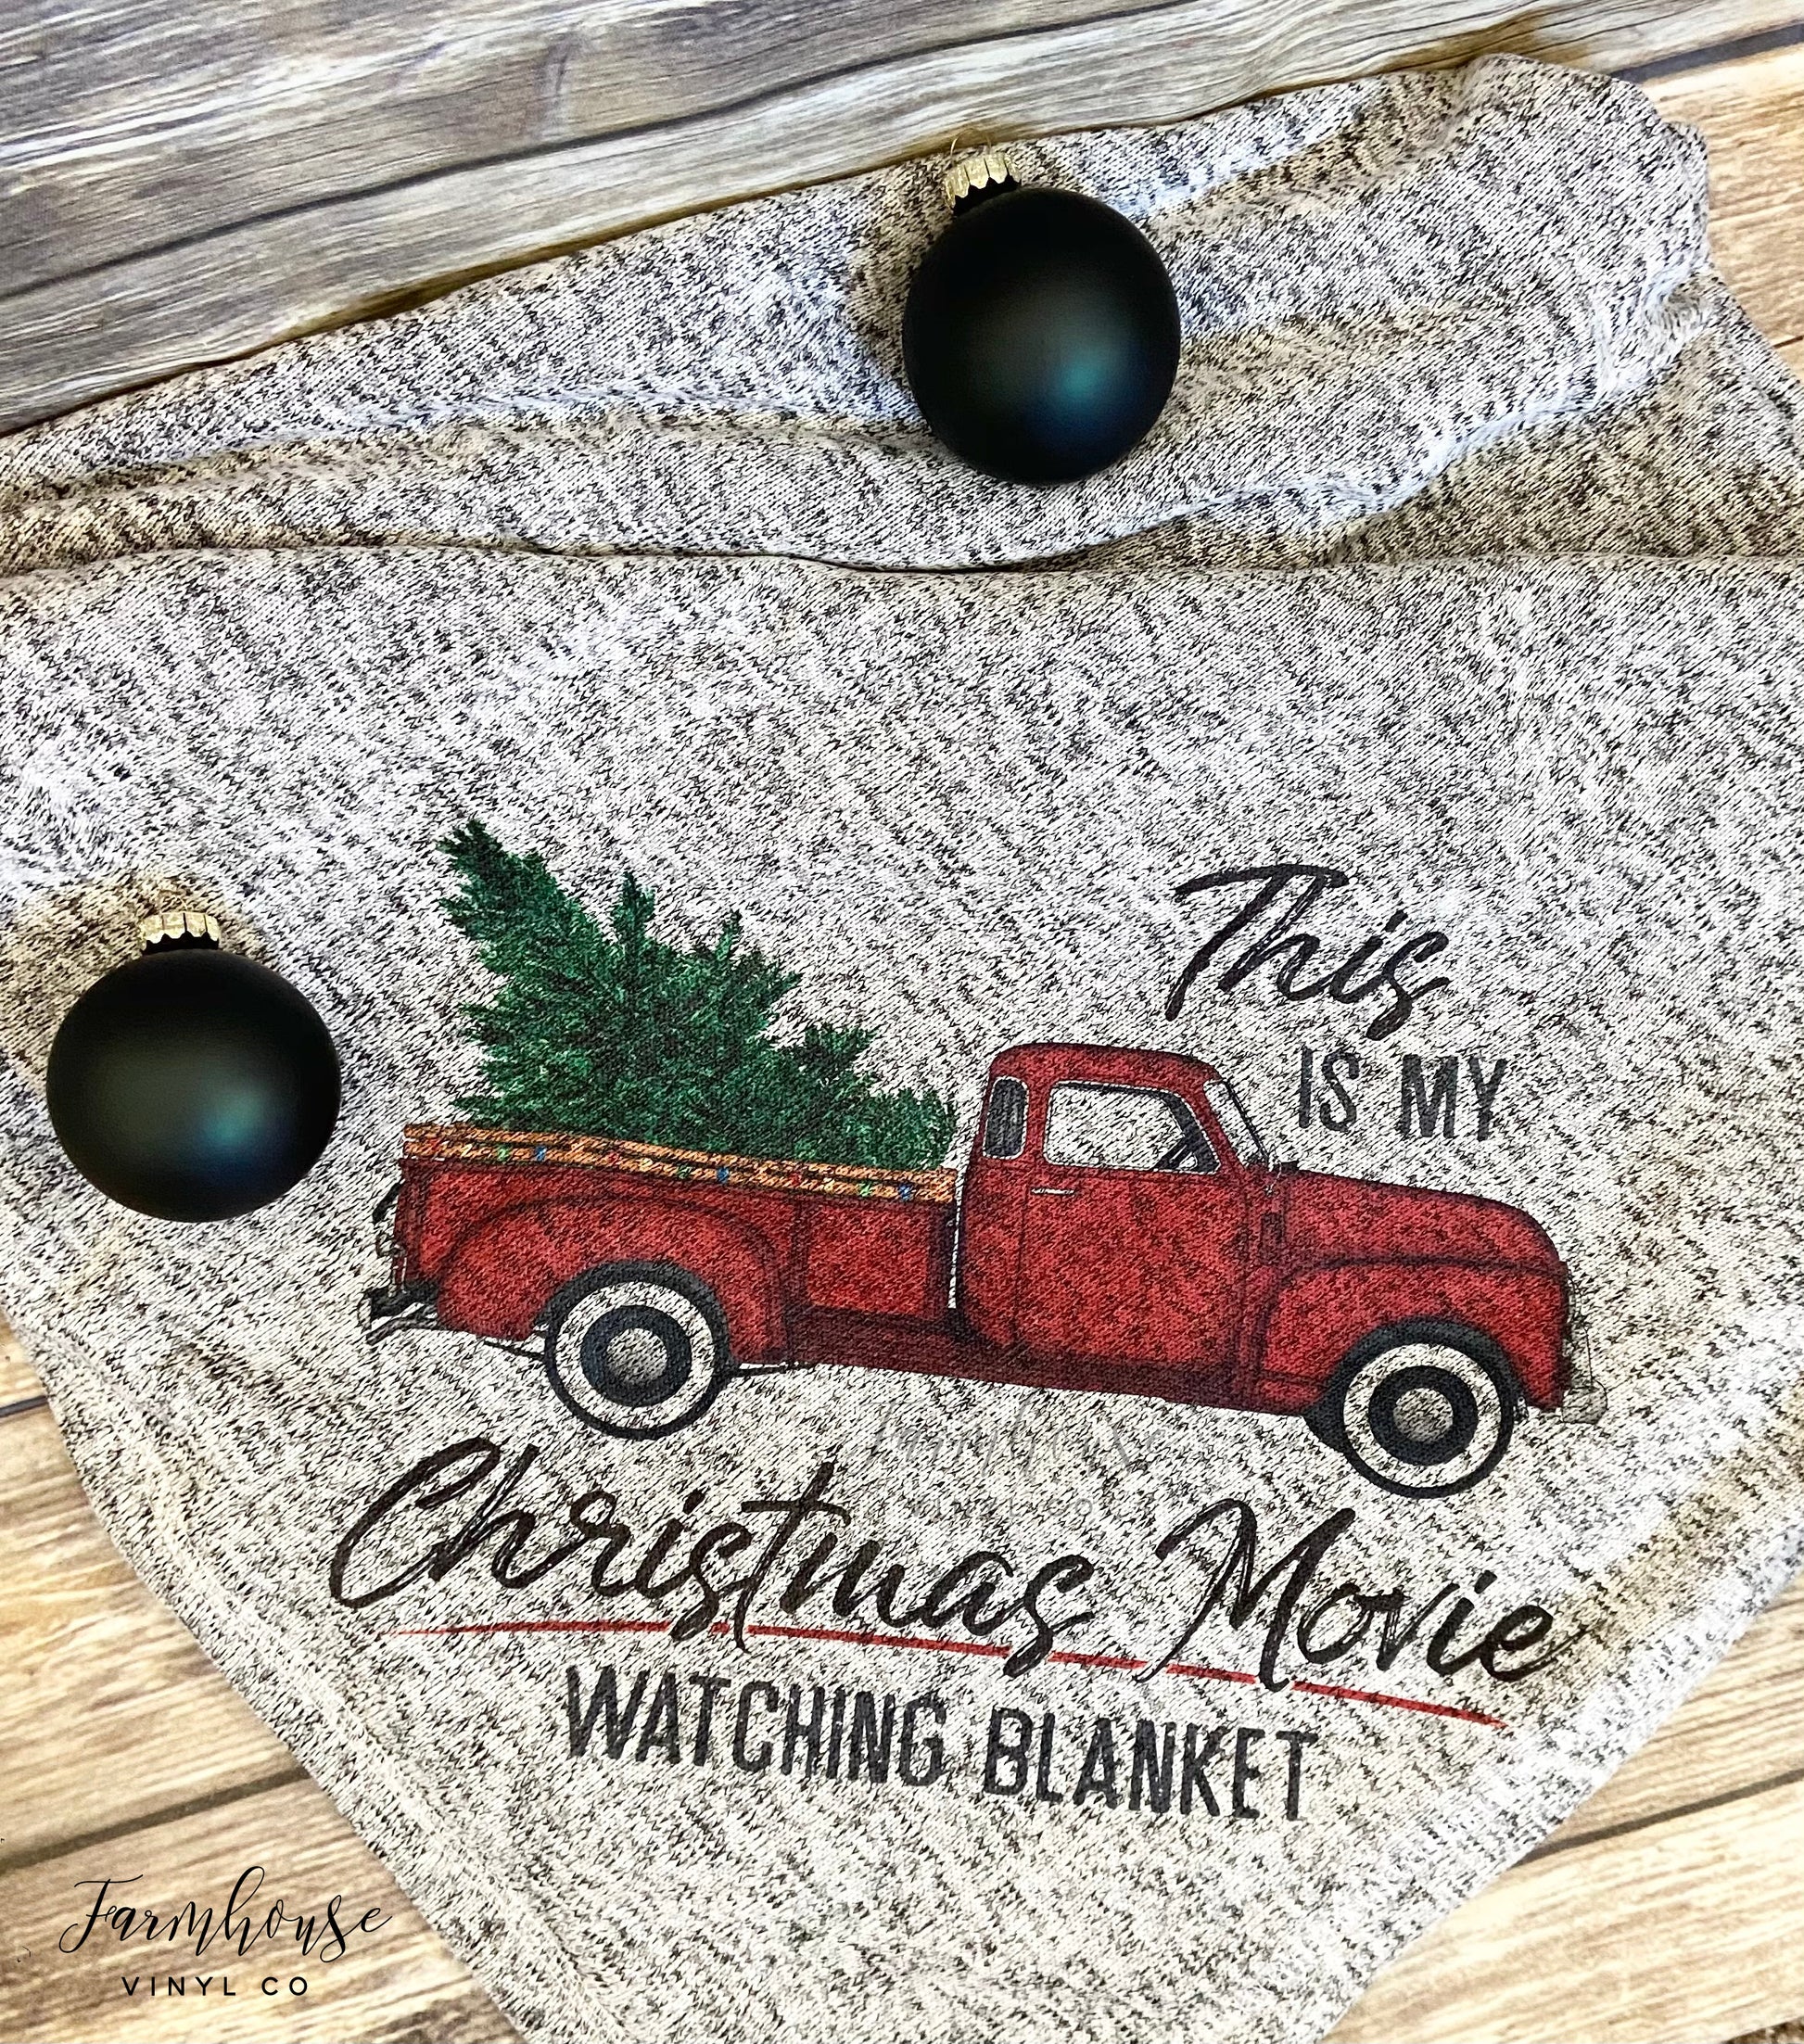 This is my Christmas Movie Watching Blanket - Farmhouse Vinyl Co